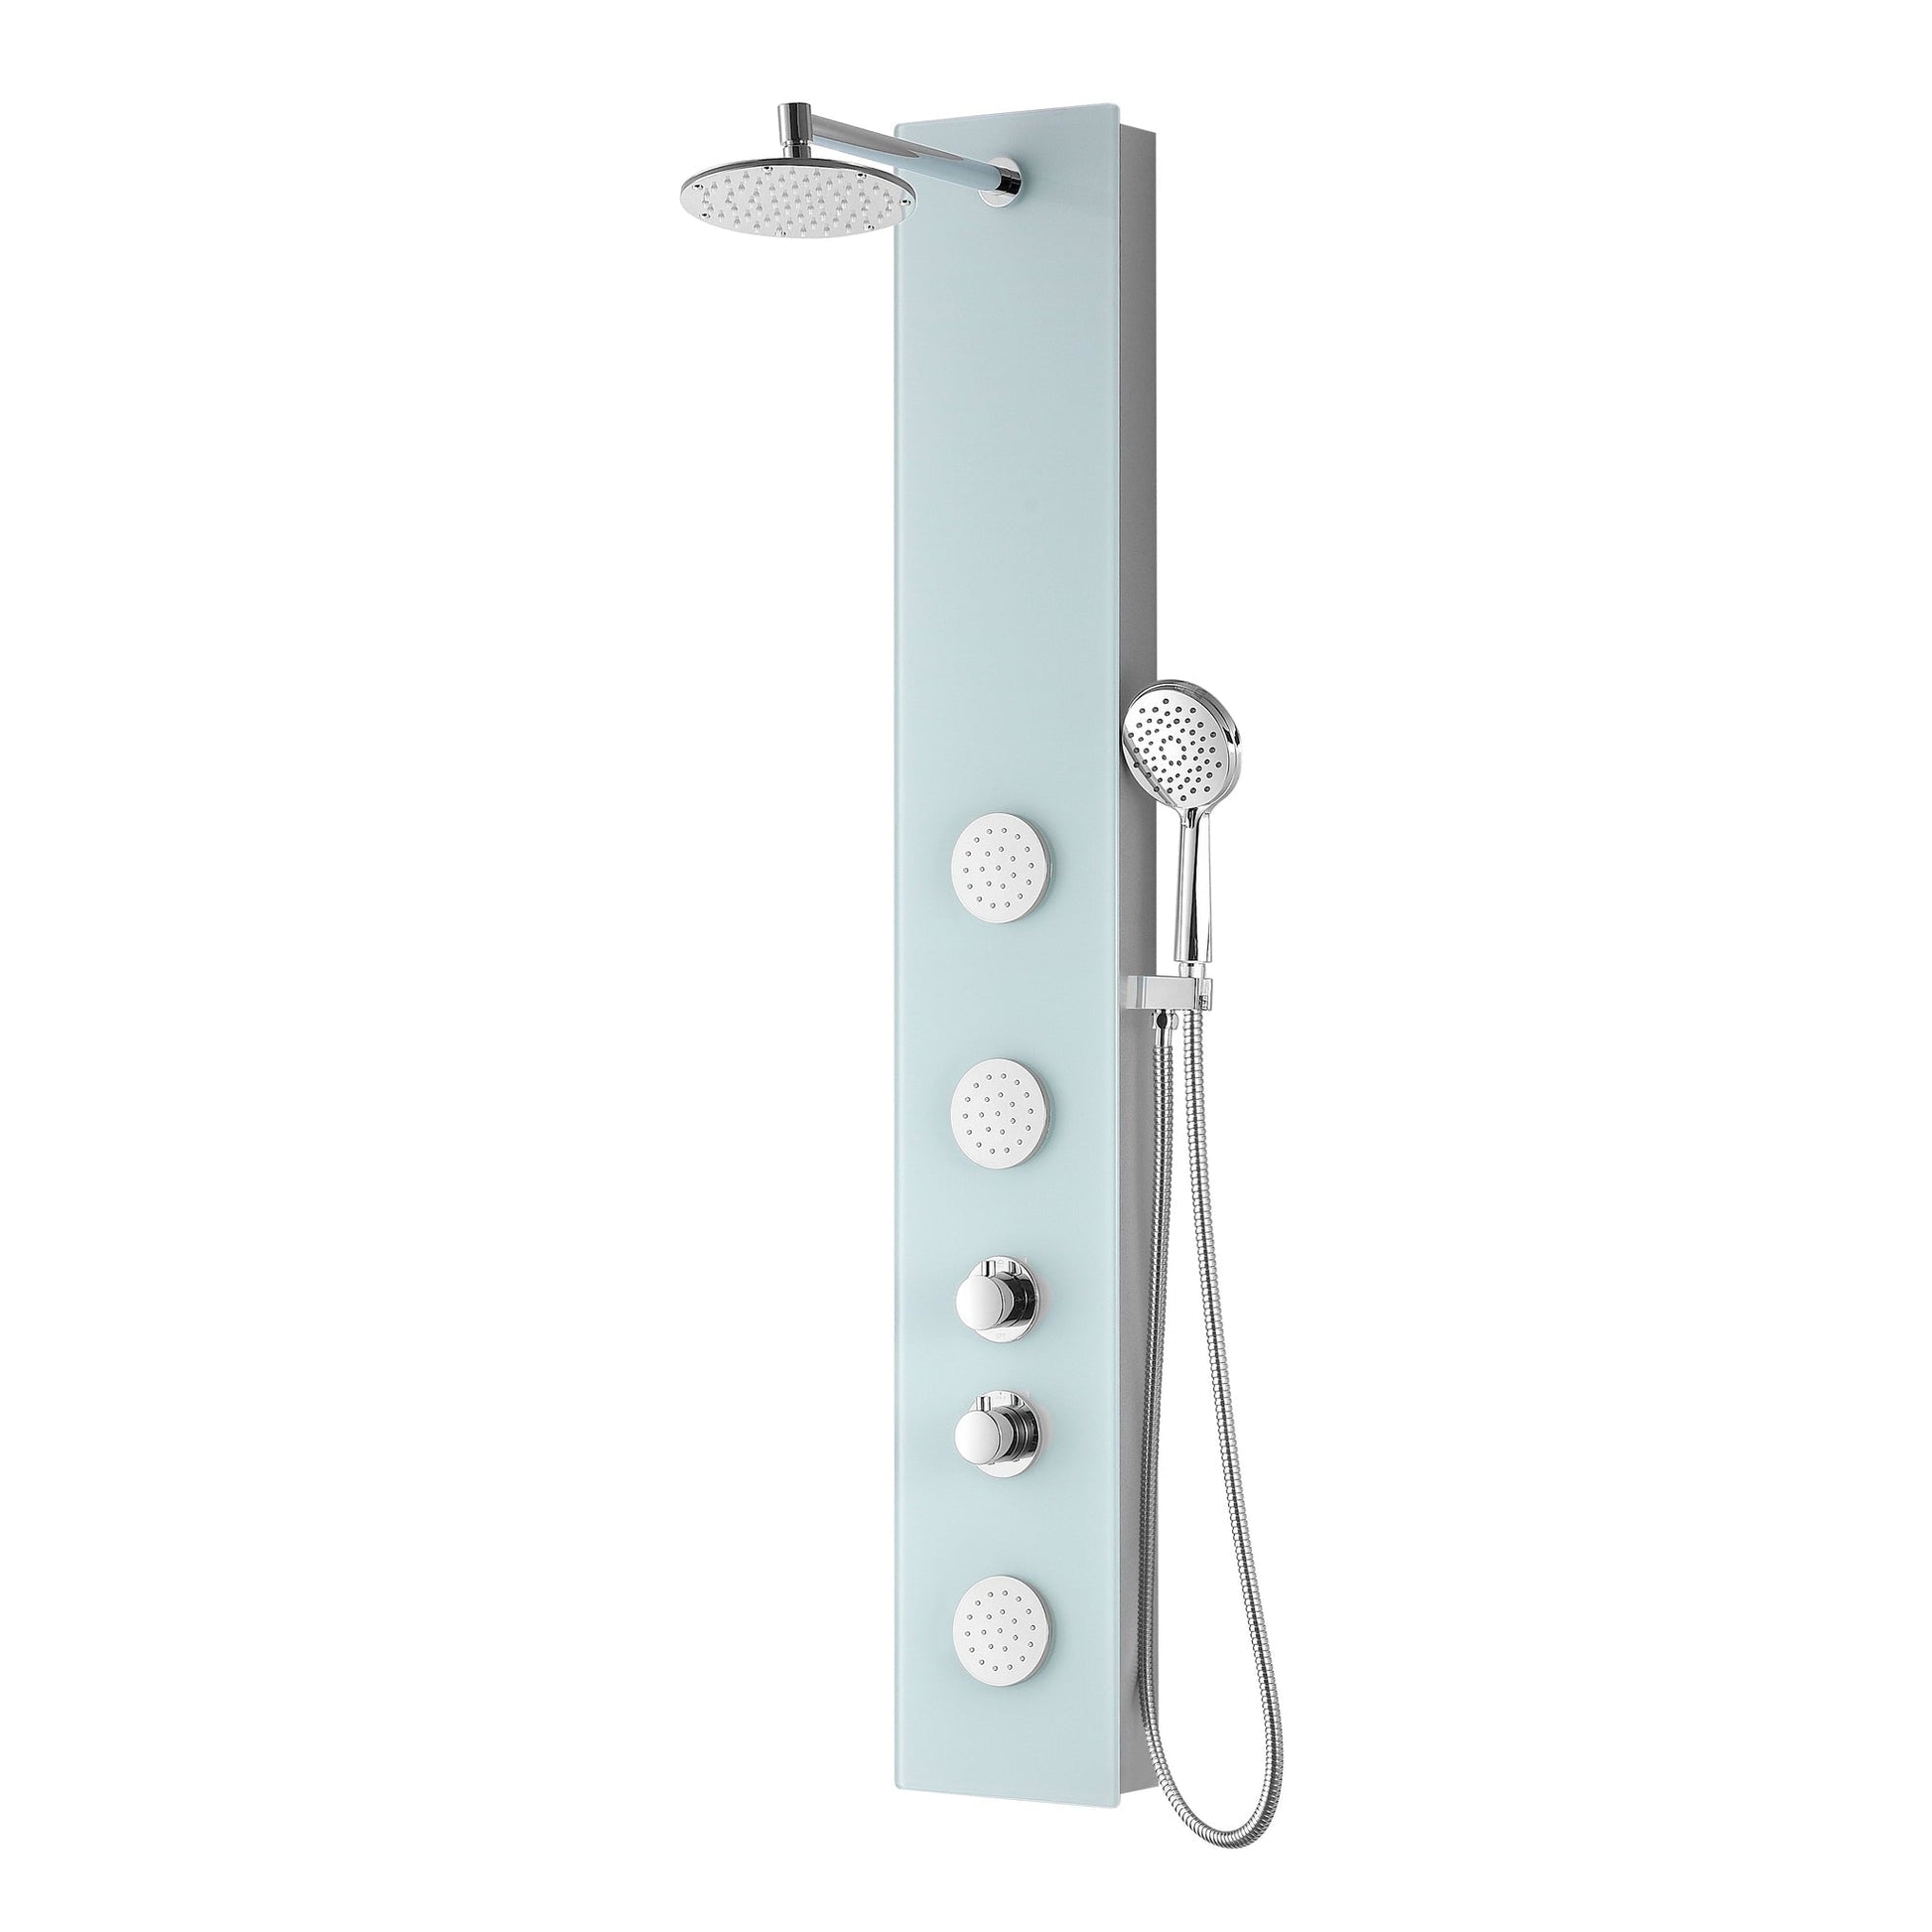 ANZZI Titan Series 60" White 3-Jetted Full Body Shower Panel With Heavy Rain Shower Head and Euro-Grip Hand Sprayer